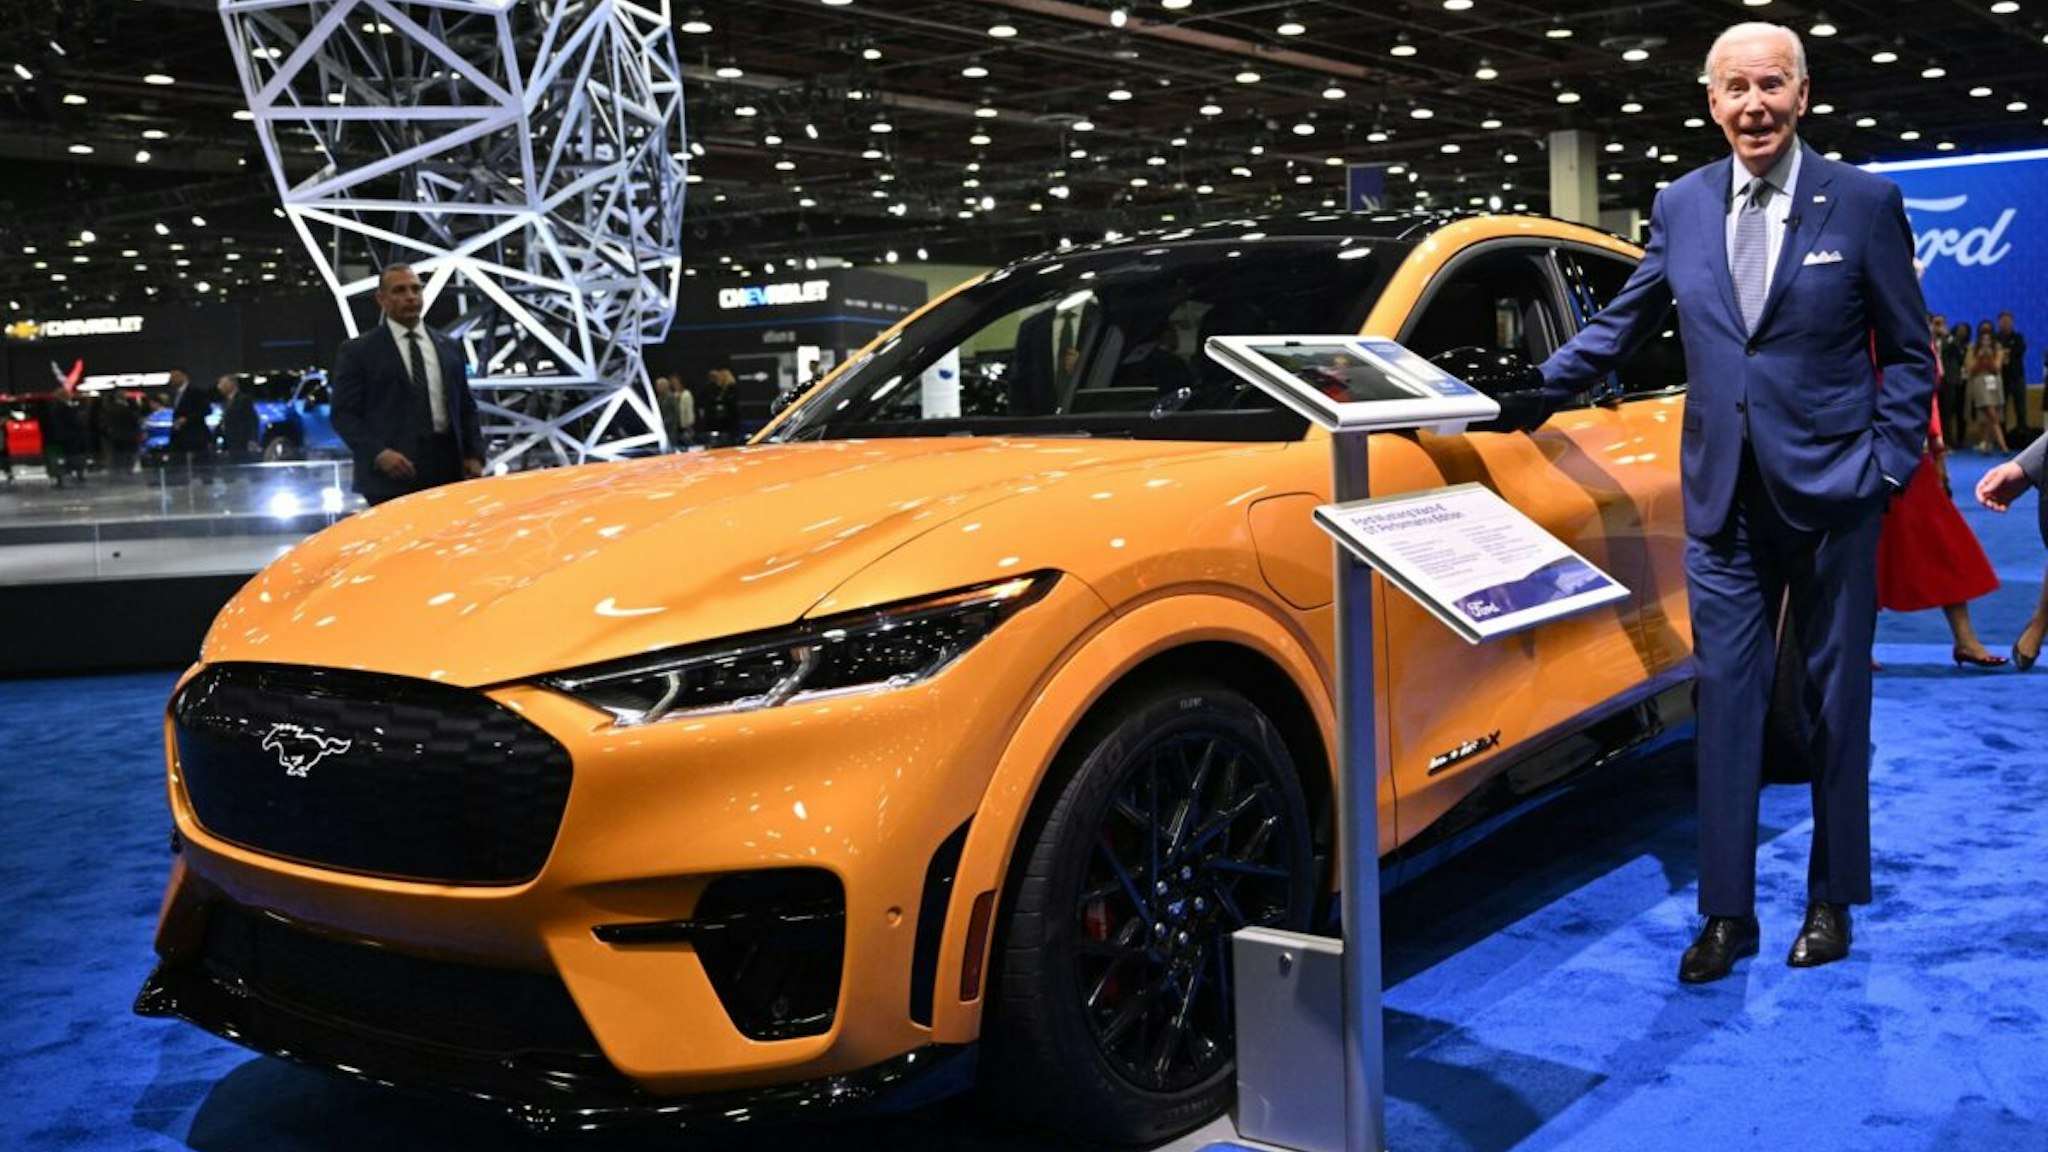 US President Joe Biden looks at an electric Ford Mustang as he tours the 2022 North American International Auto Show at Huntington Place Convention Center in Detroit, Michigan on September 14, 2022. - Biden is visiting the auto show to highlight electric vehicle manufacturing.